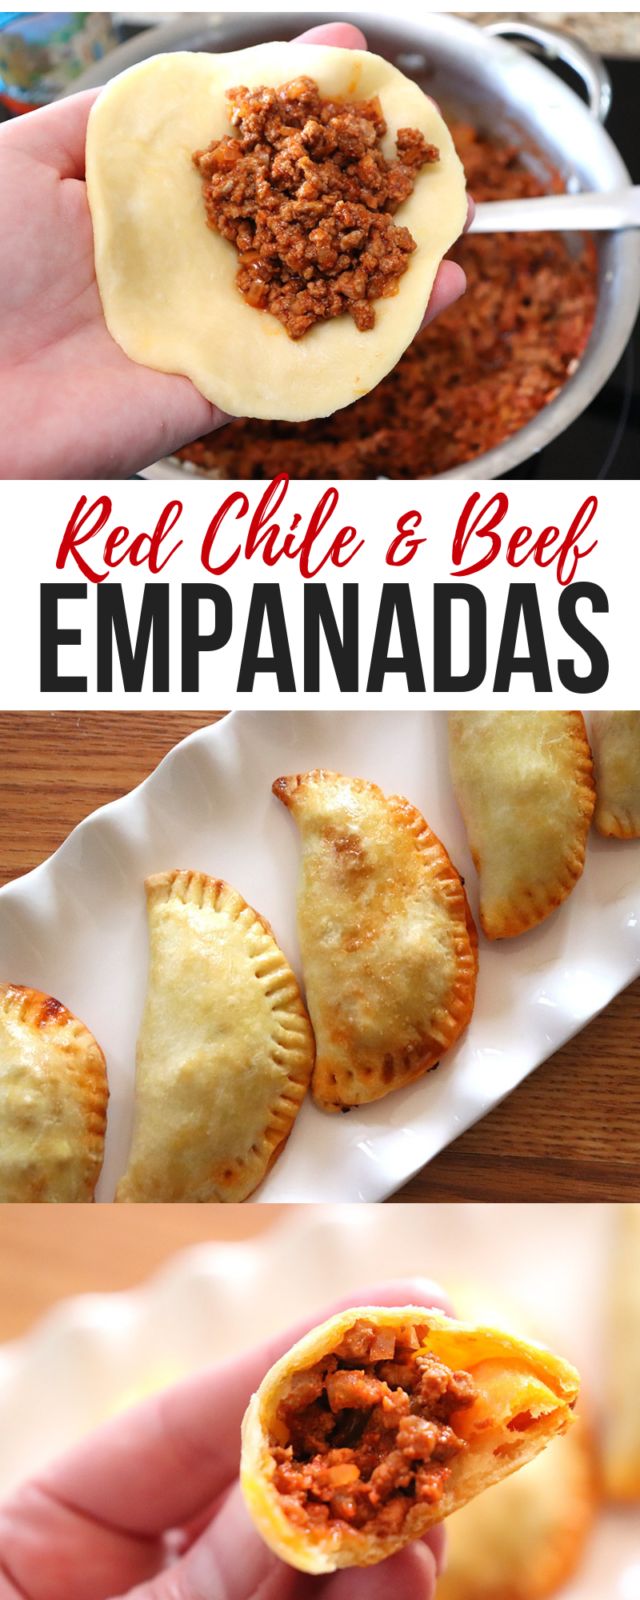 this is an easy recipe for red chili and beef empanadas